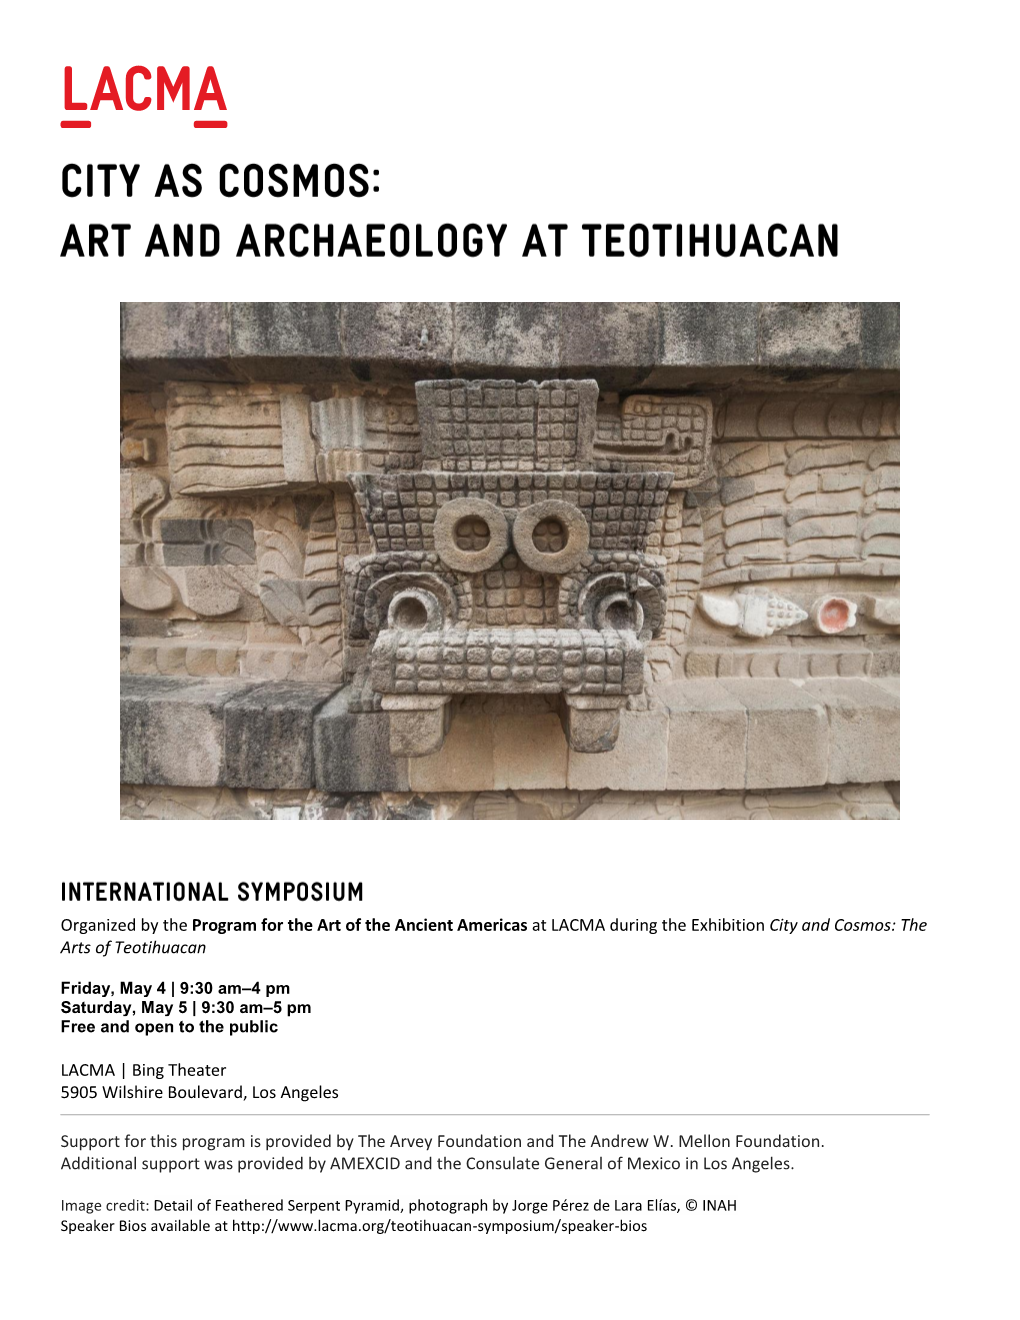 Organized by the Program for the Art of the Ancient Americas at LACMA During the Exhibition City and Cosmos: the Arts of Teotihuacan